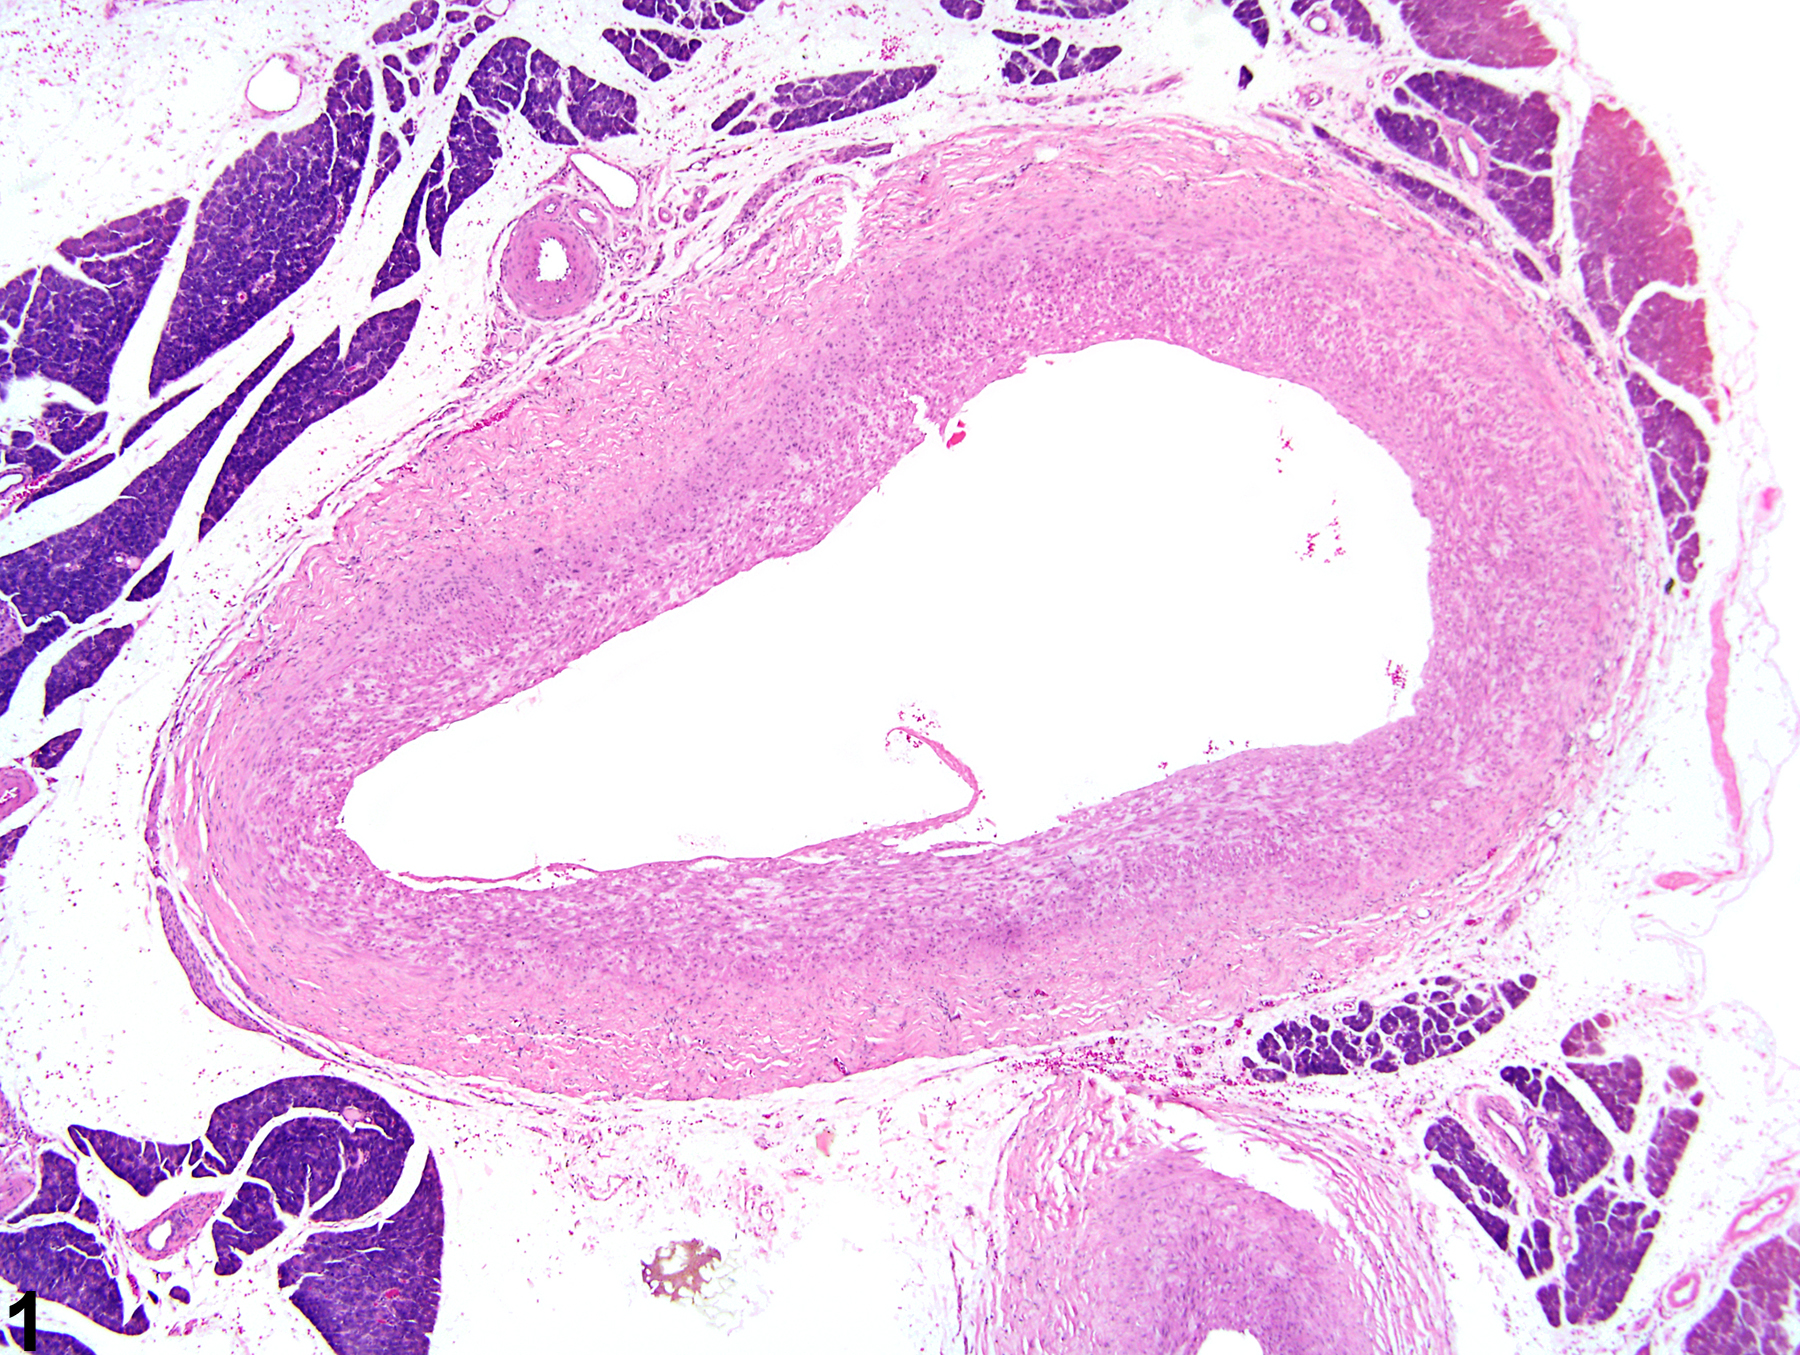 Image of arteriosclerosis in the mesentery, artery from a male F344/N rat in a chronic study